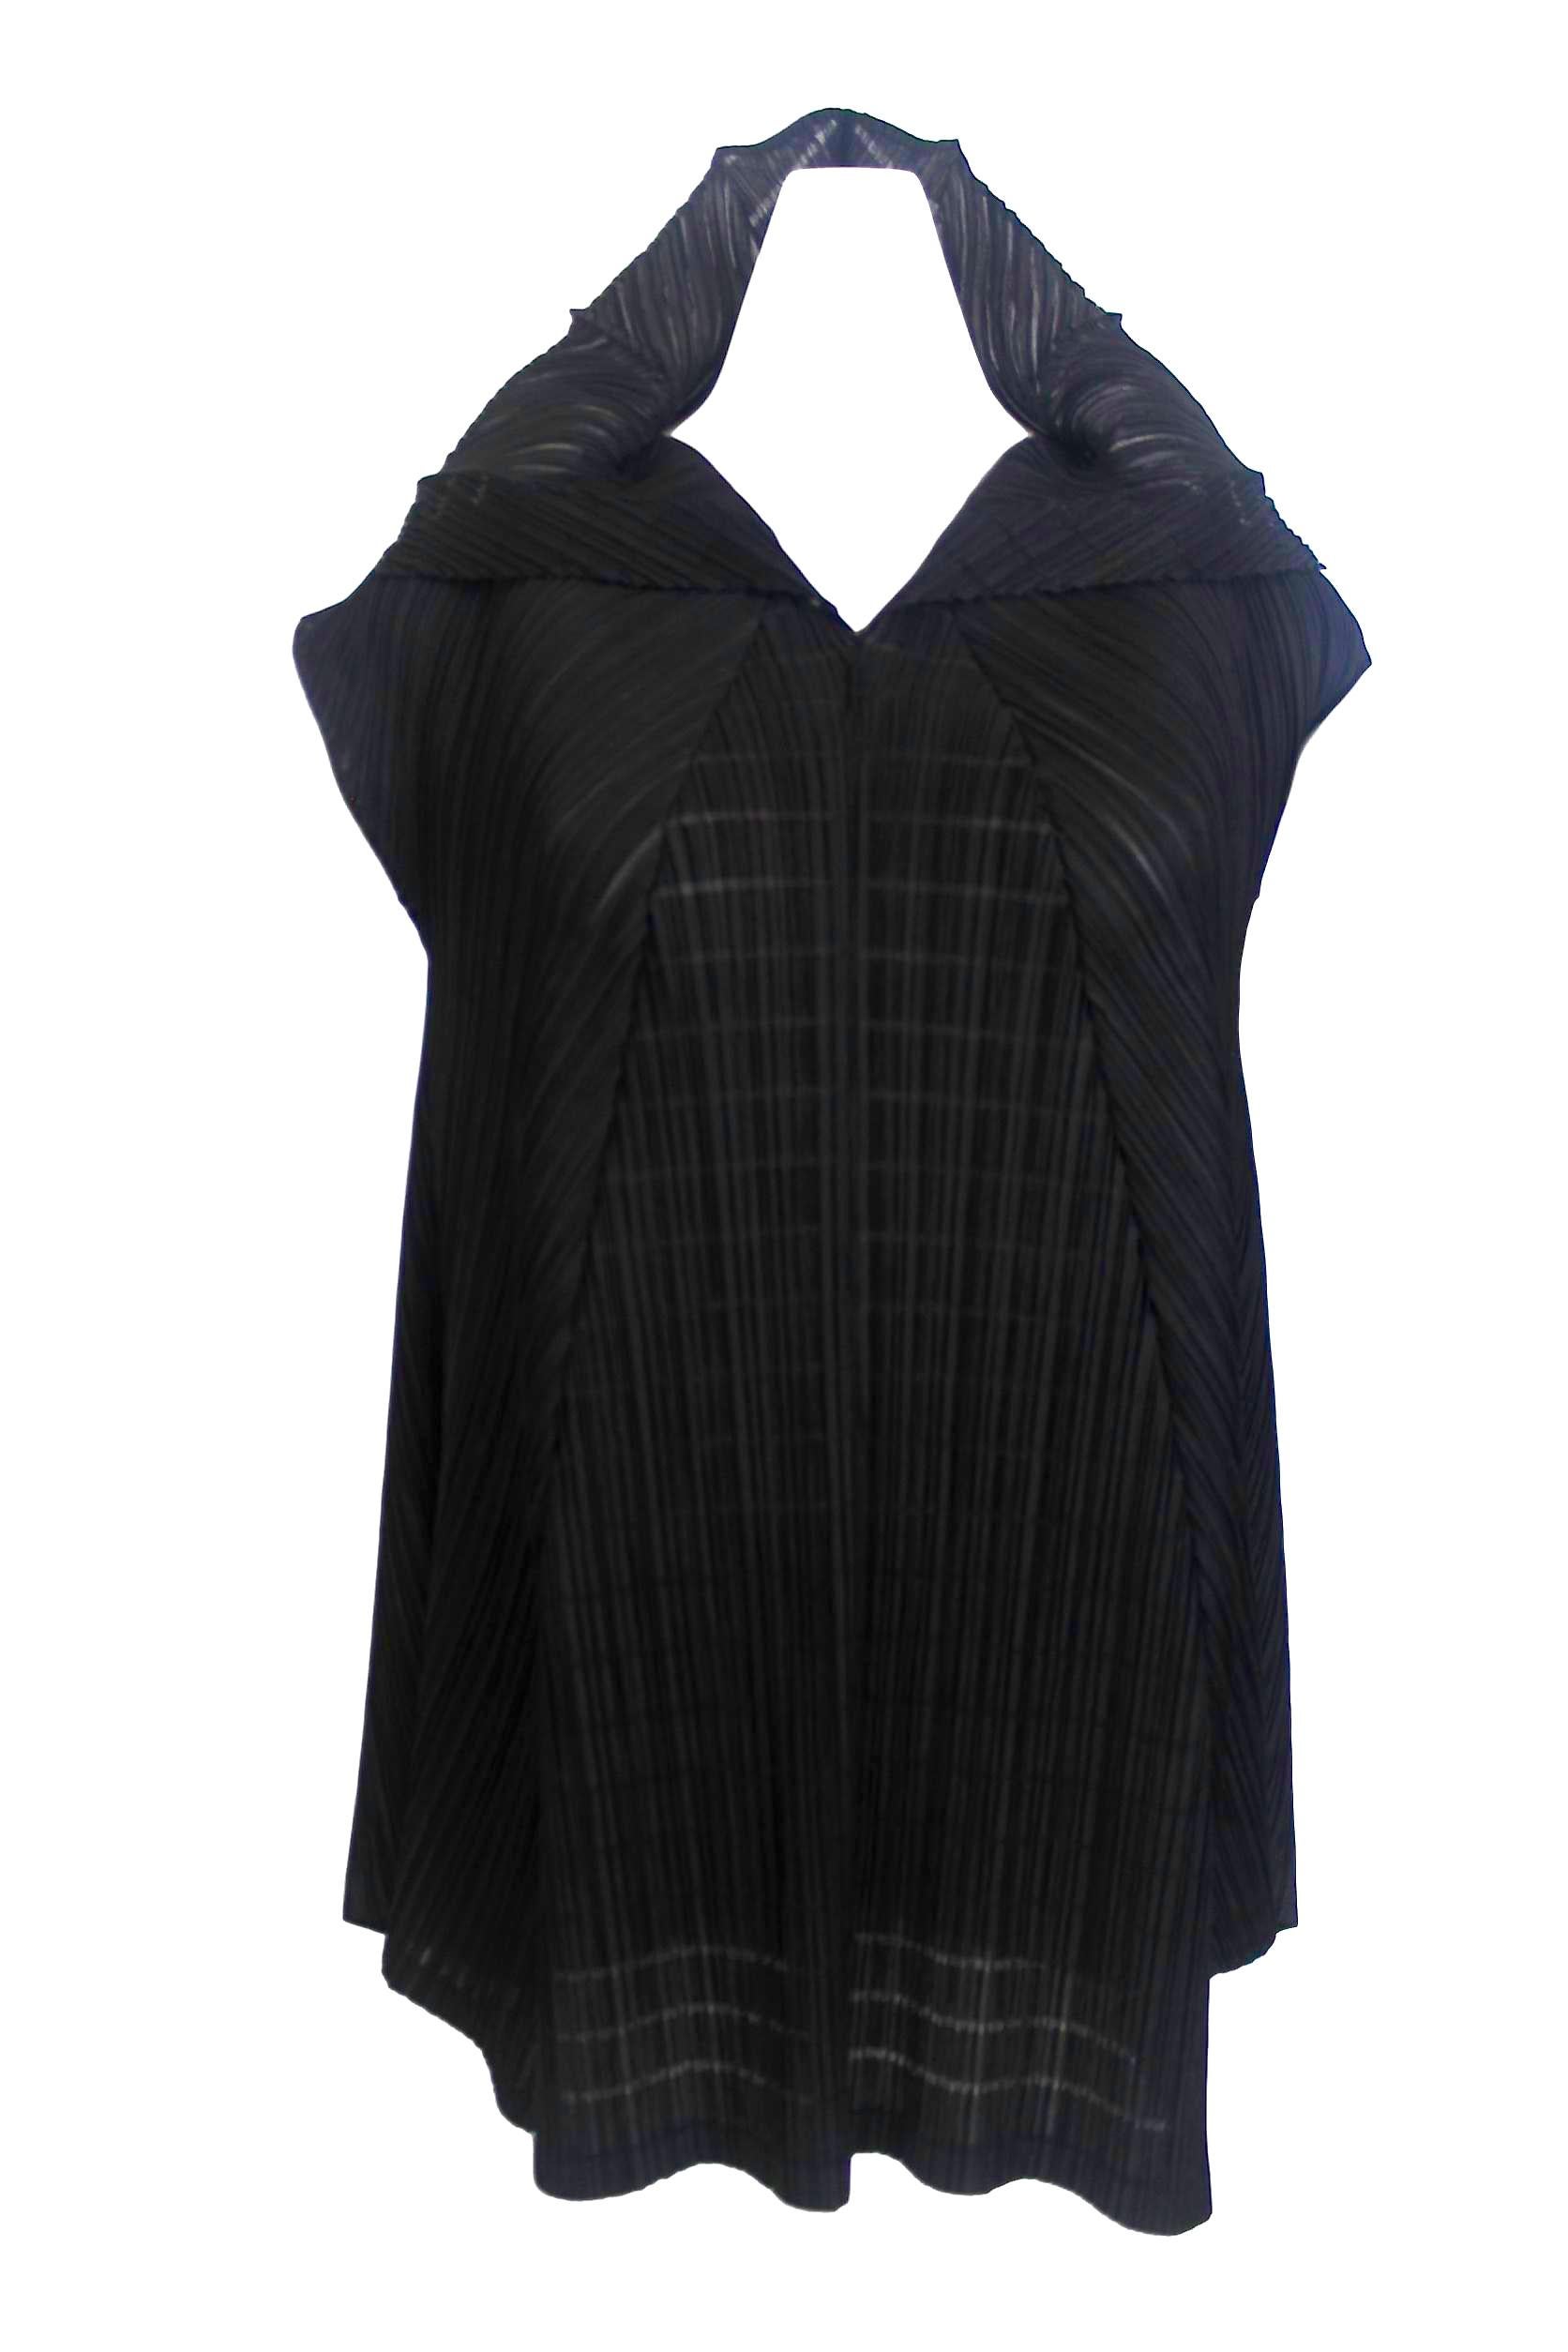 Issey Miyake 1990s Pleats Please Ornamental Collar Blouse In Excellent Condition For Sale In Bath, GB